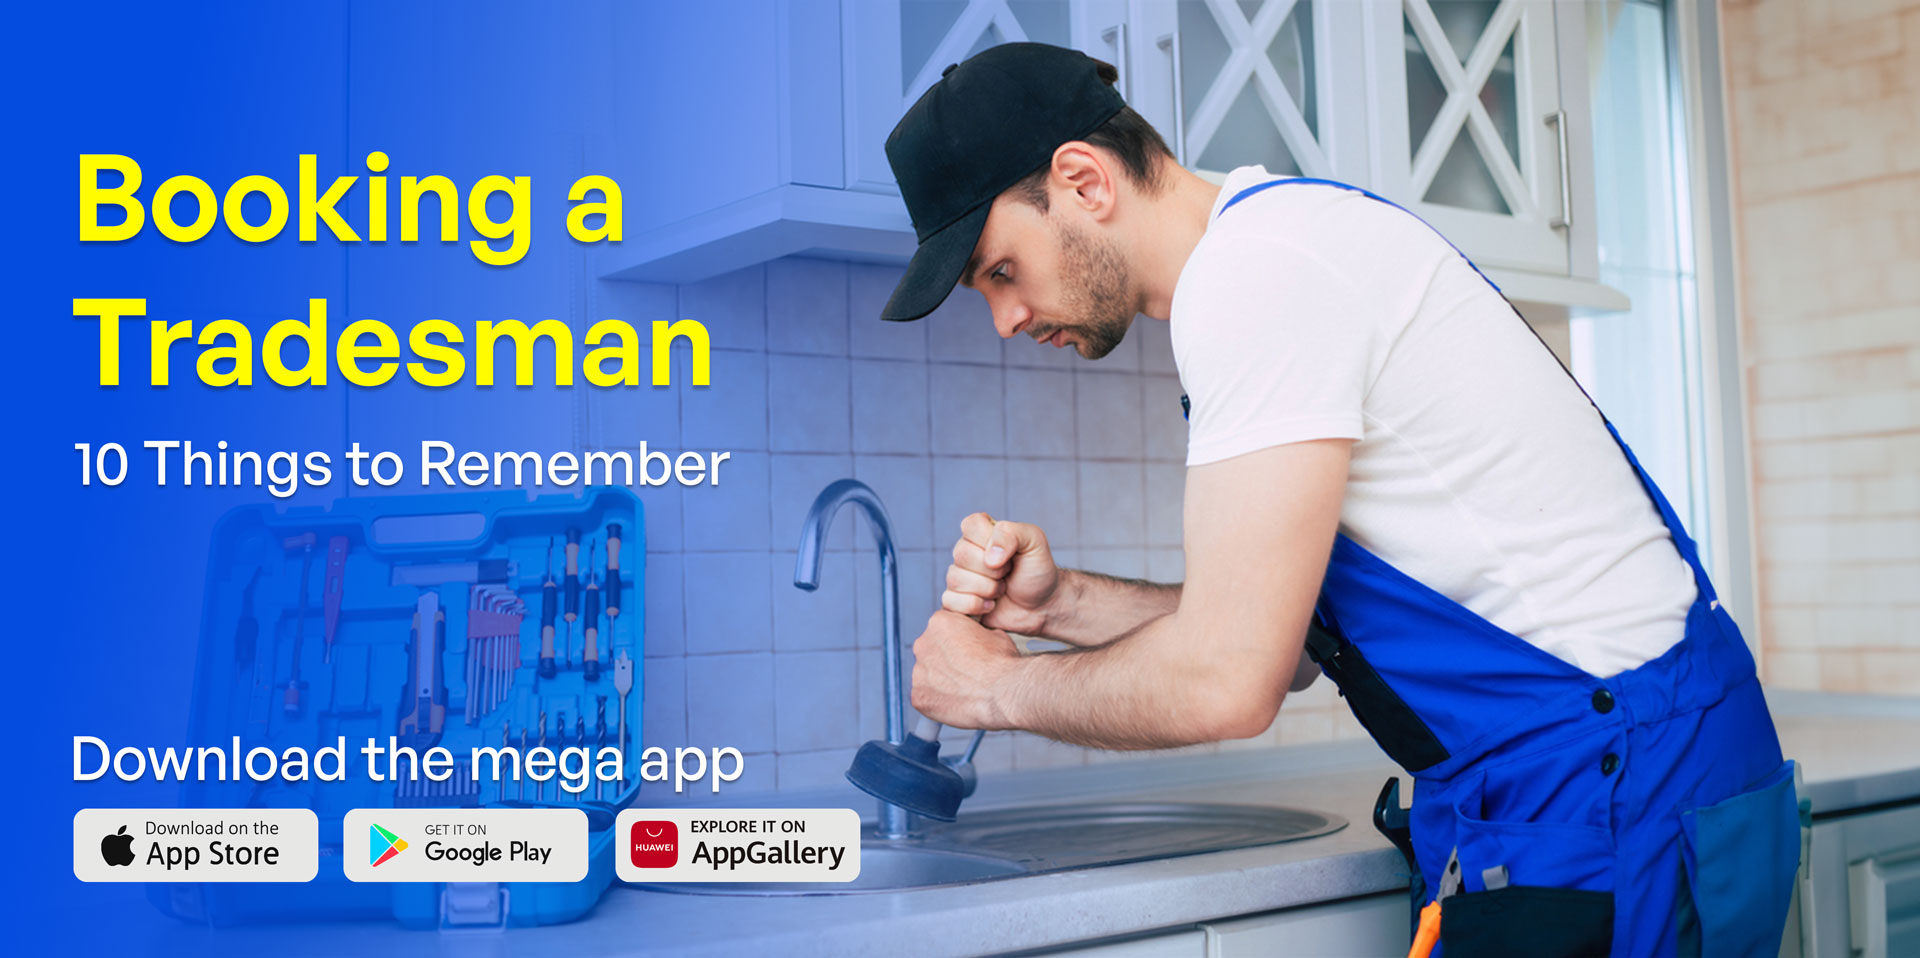 Booking a Tradesman: 10 Things to Remember